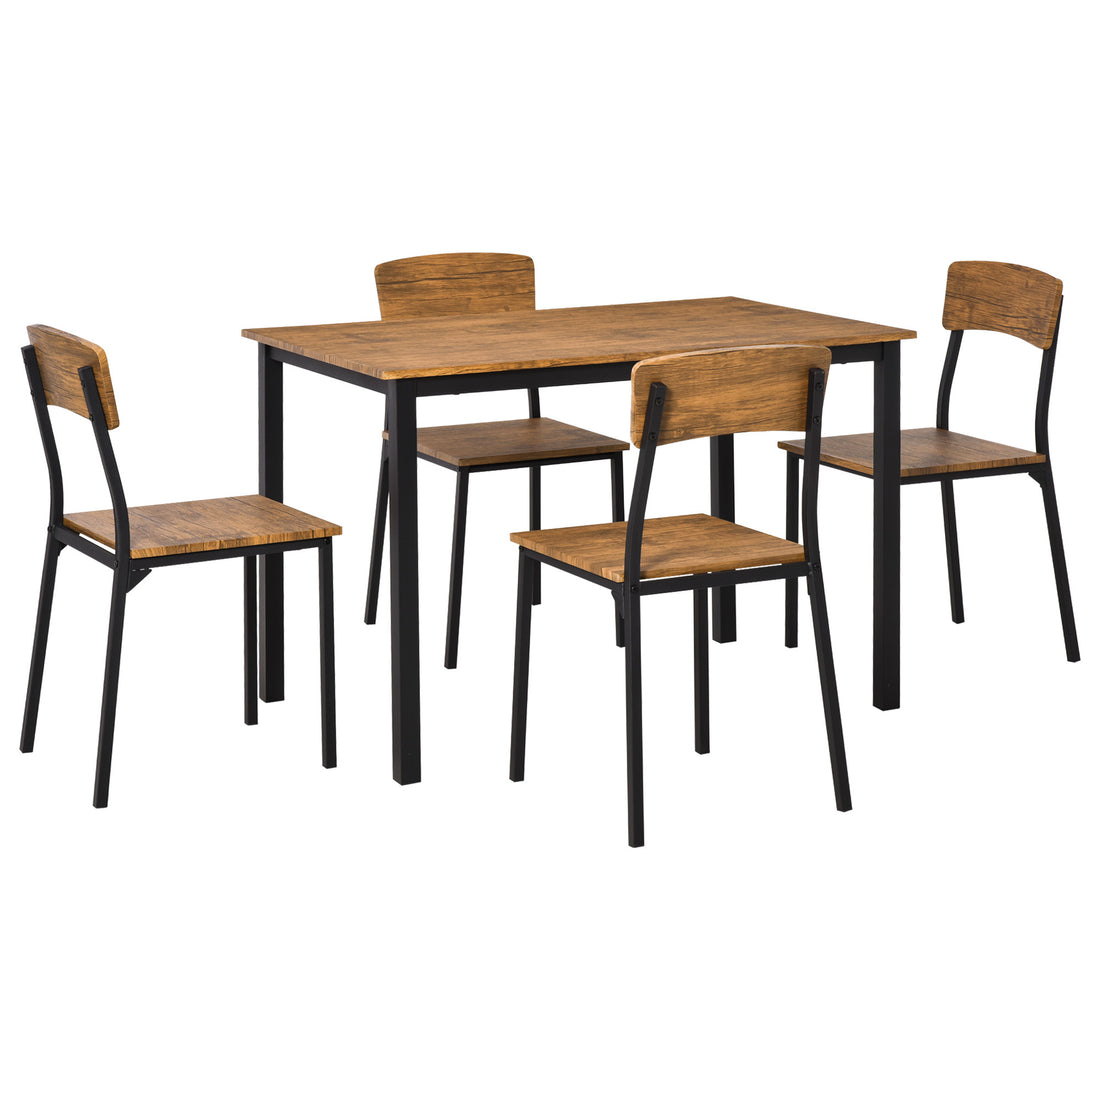 5 Piece Industrial Dining Table Set for 4, Rectangular rustic brown-mdf+steel